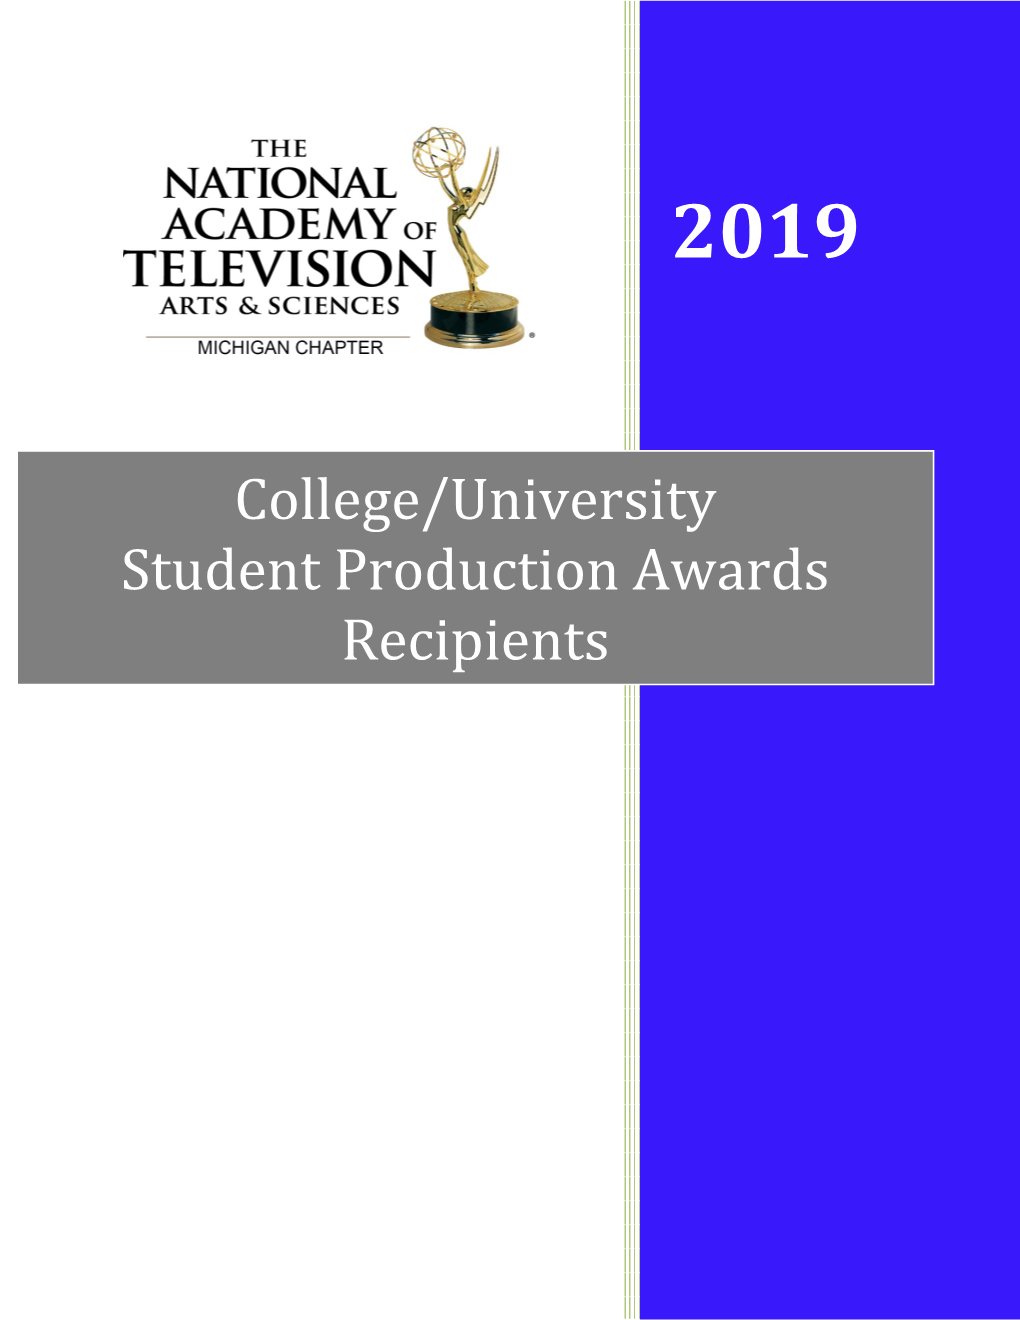 College/University Student Production Awards Recipients